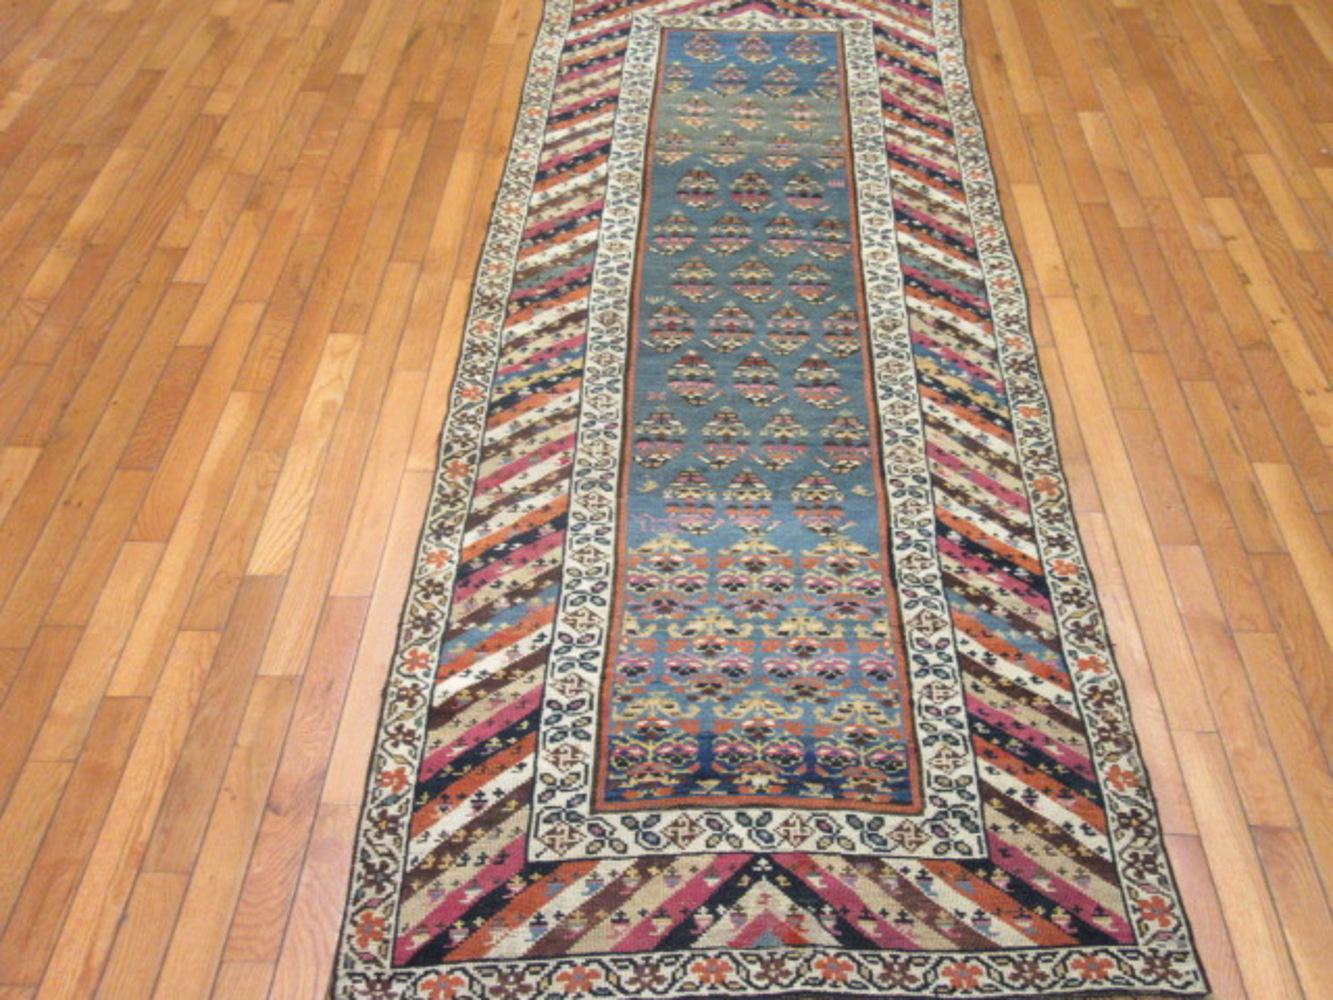 This is an antique hand-knotted rugs from the village Genjeh in the Caucuses. It is made with all wool colored with natural dyes in a traditional paisley design on a light blue field and frames with the slanted trade mark design of the Genjeh rugs.